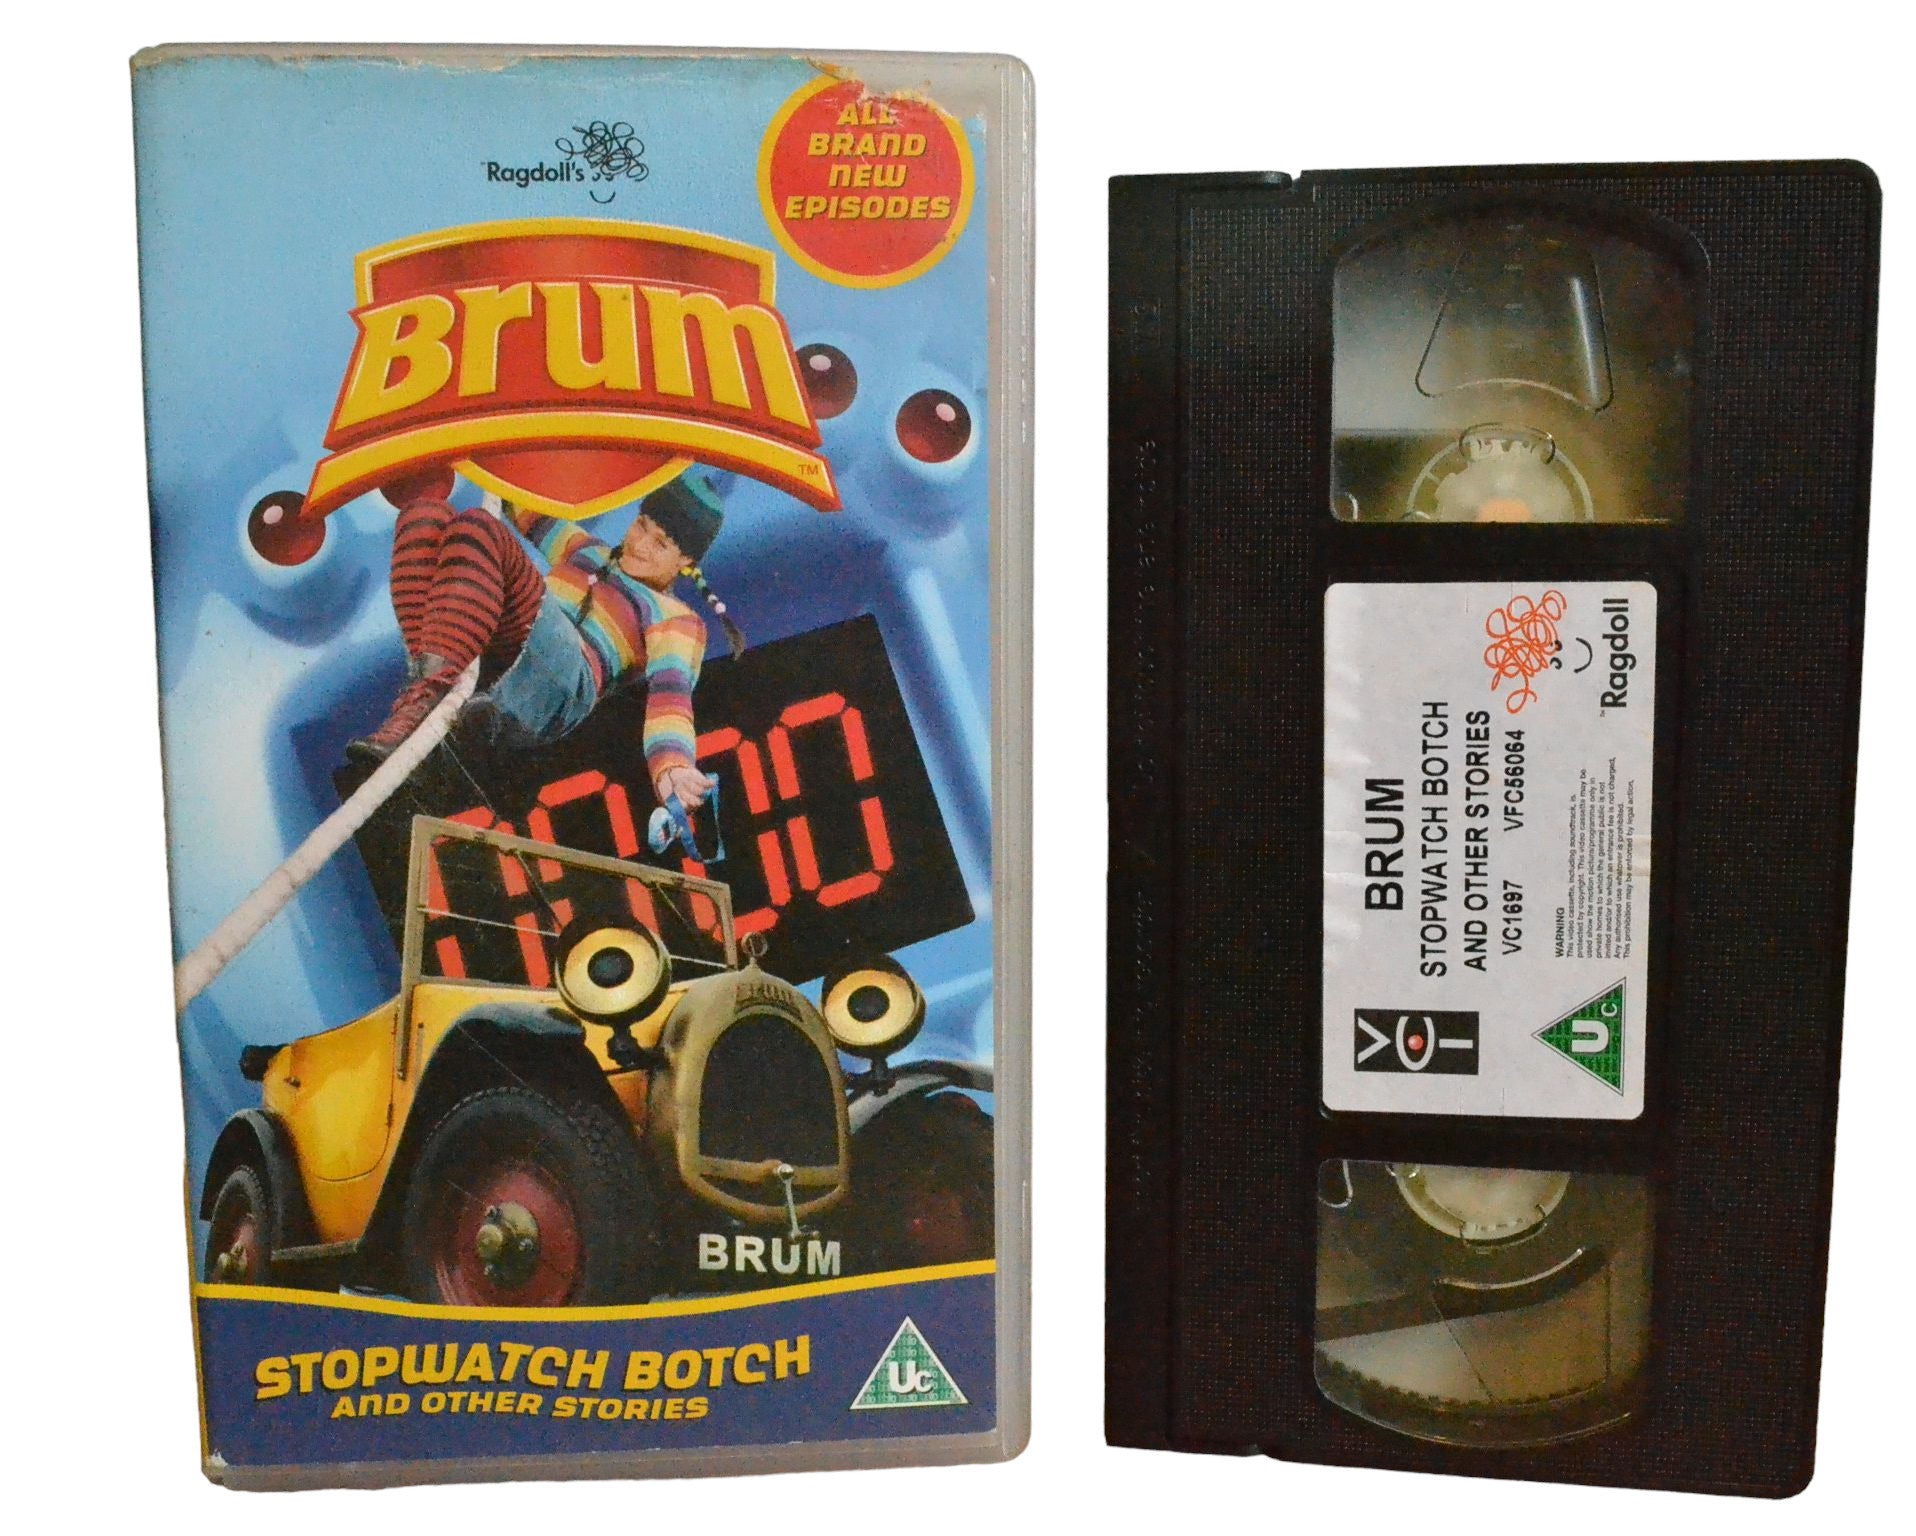 Brum (Stopwatch Botch And Other Stories) - Kevin McGreevy - Ragdoll - VC1697 - Children - Pal - VHS-